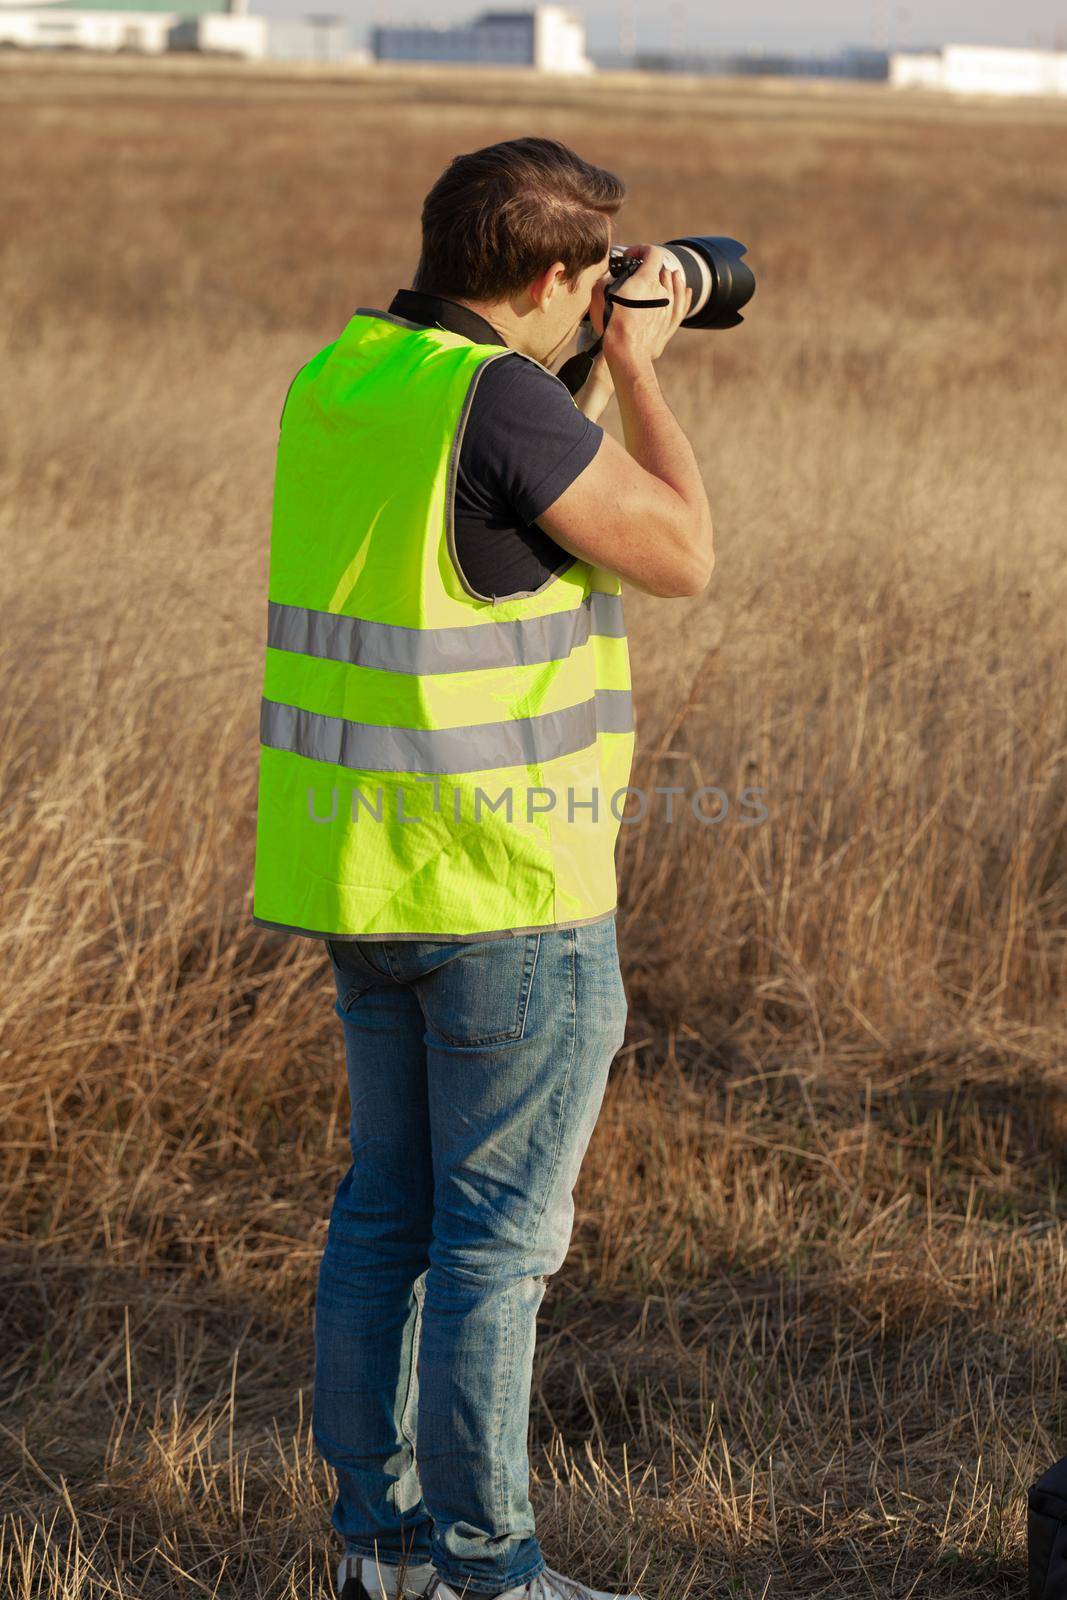 Man in yellow vest does plane spotting at the airport by Fabrikasimf